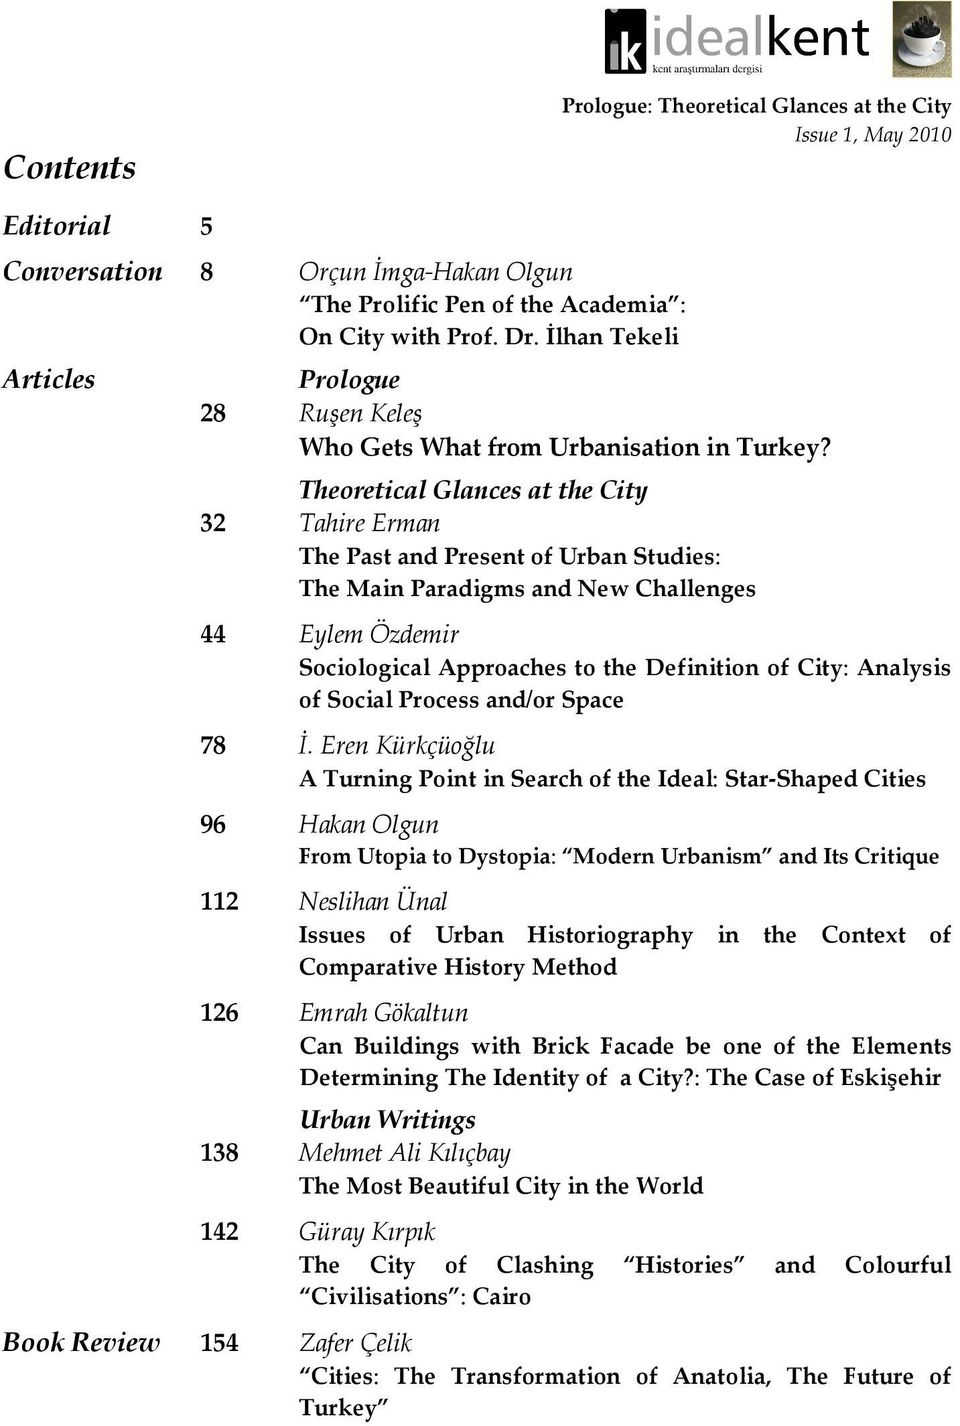 Theoretical Glances at the City 32 Tahire Erman The Past and Present of Urban Studies: The Main Paradigms and New Challenges 44 Eylem Özdemir Sociological Approaches to the Definition of City: